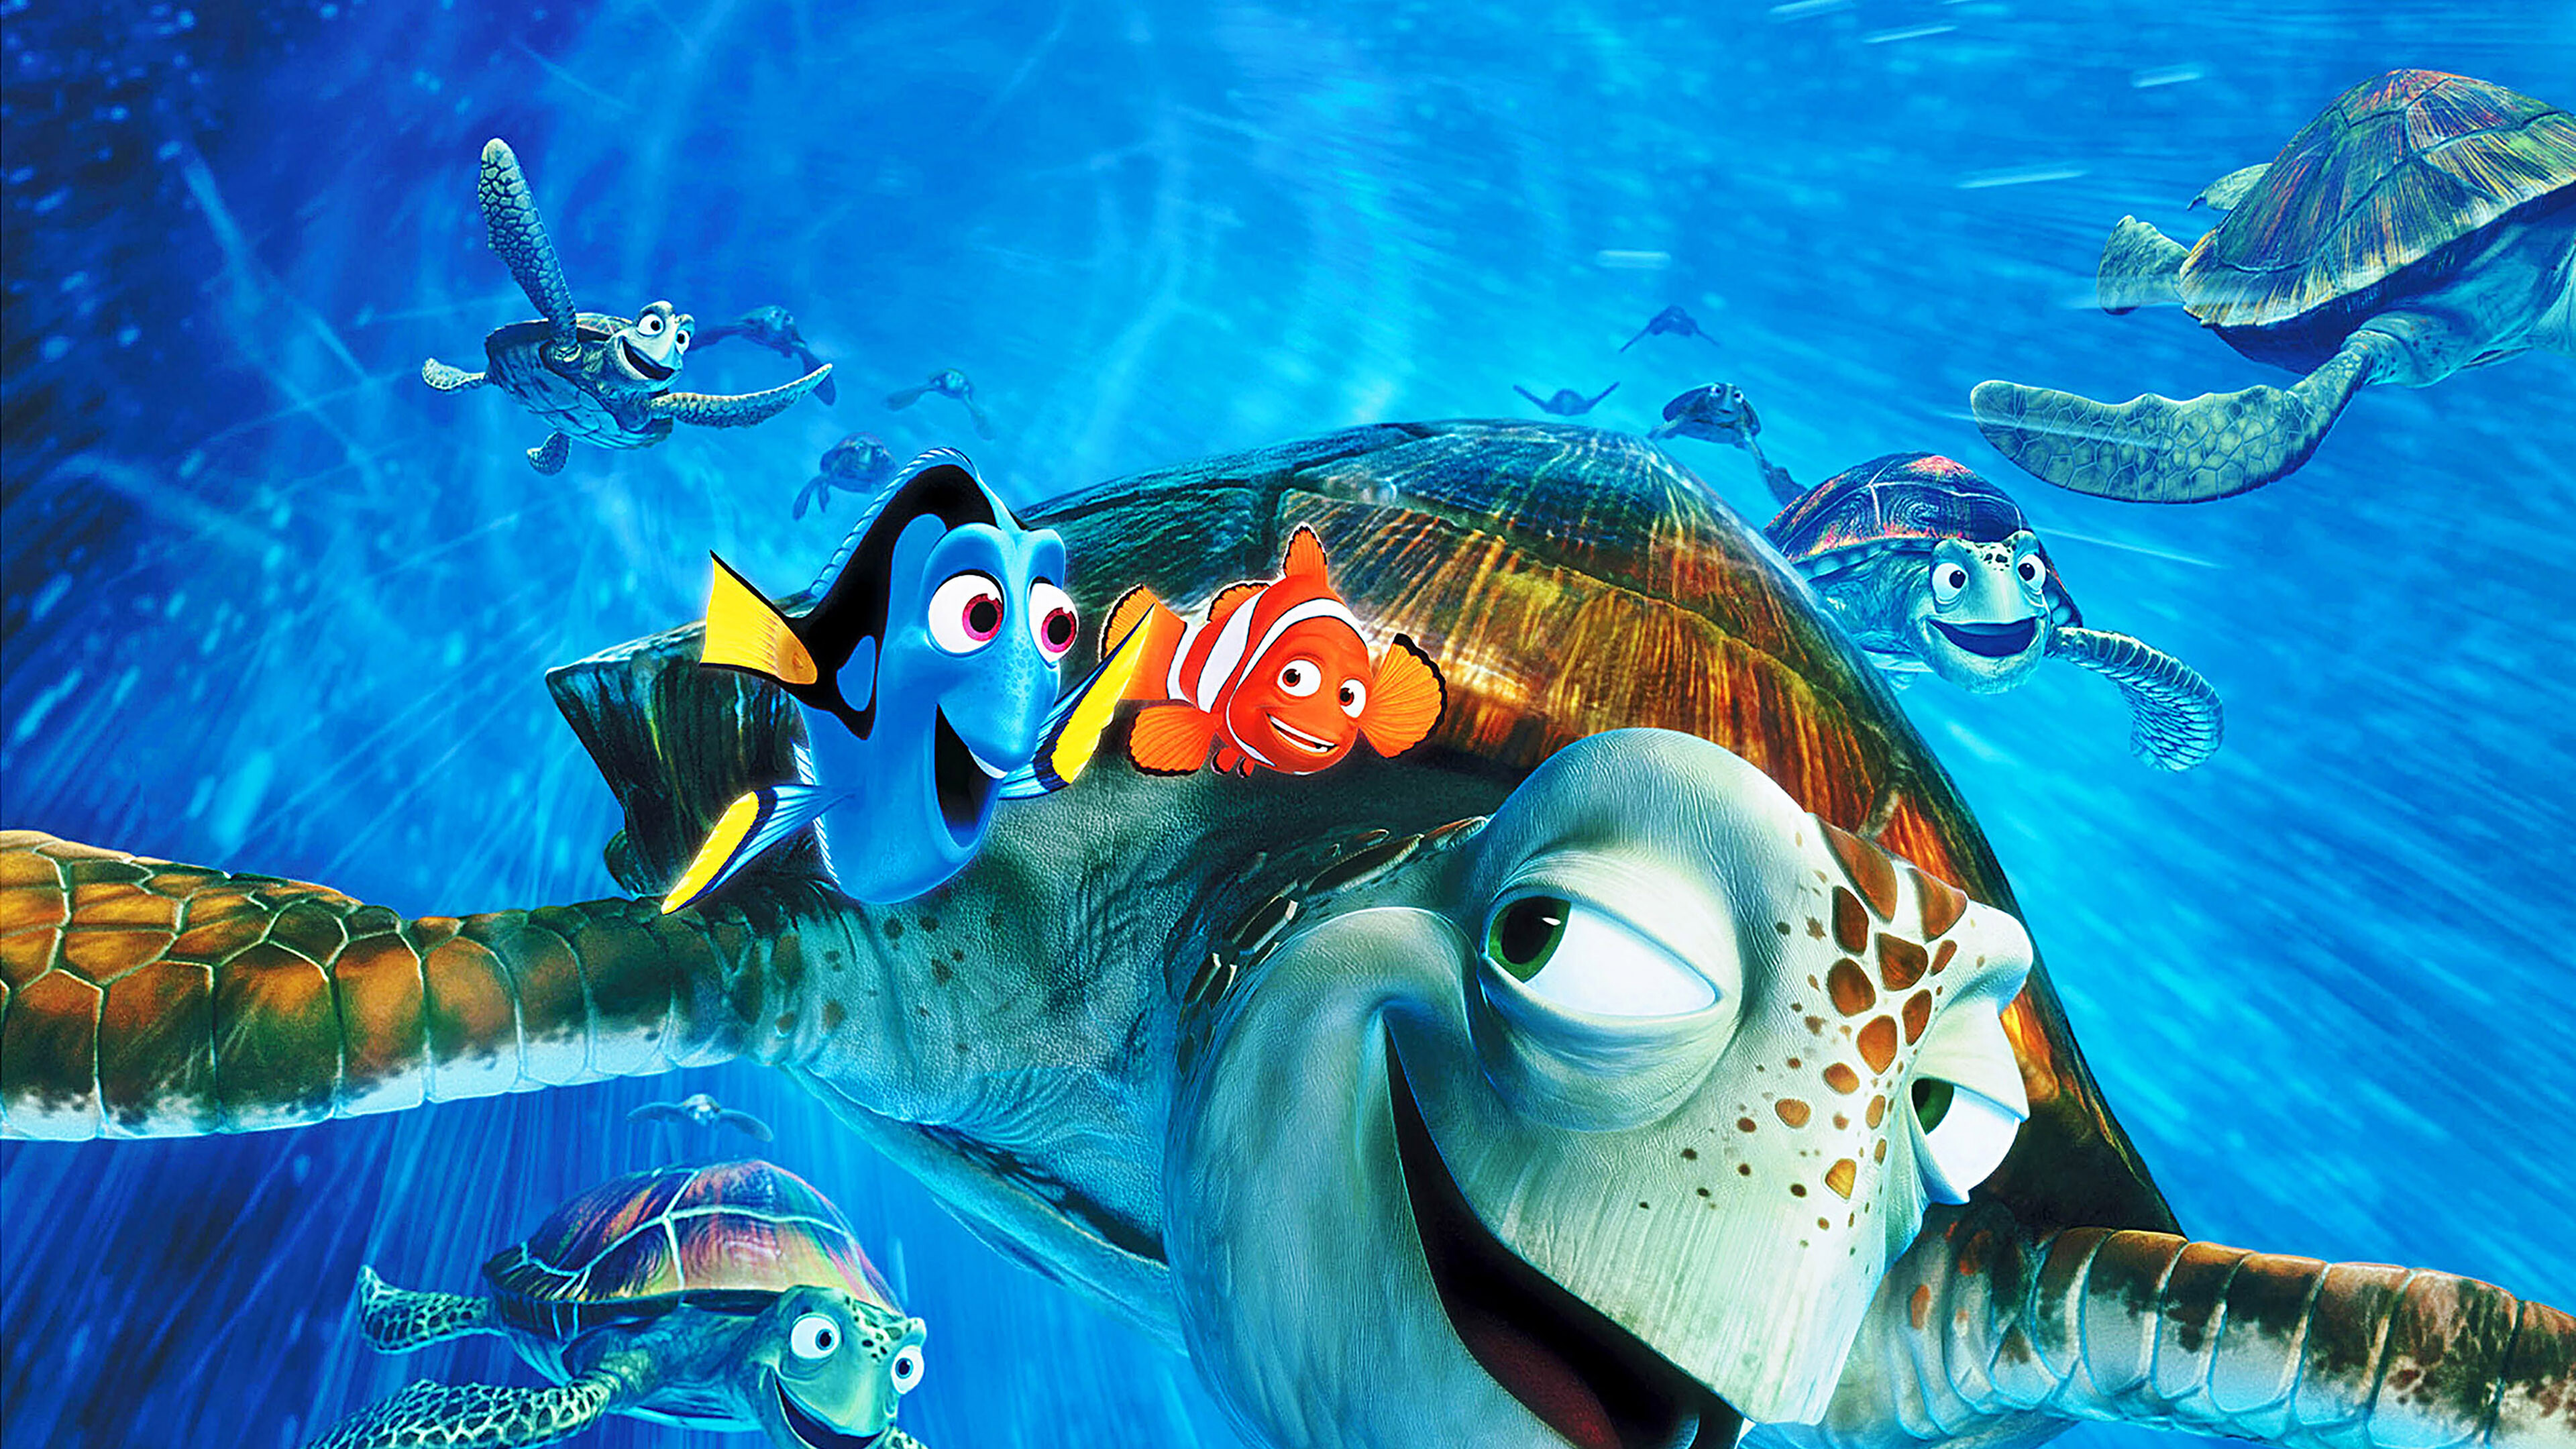 Finding Nemo: The best-selling DVD title of all time, with over 40 million copies sold as of 2006. 3840x2160 4K Wallpaper.